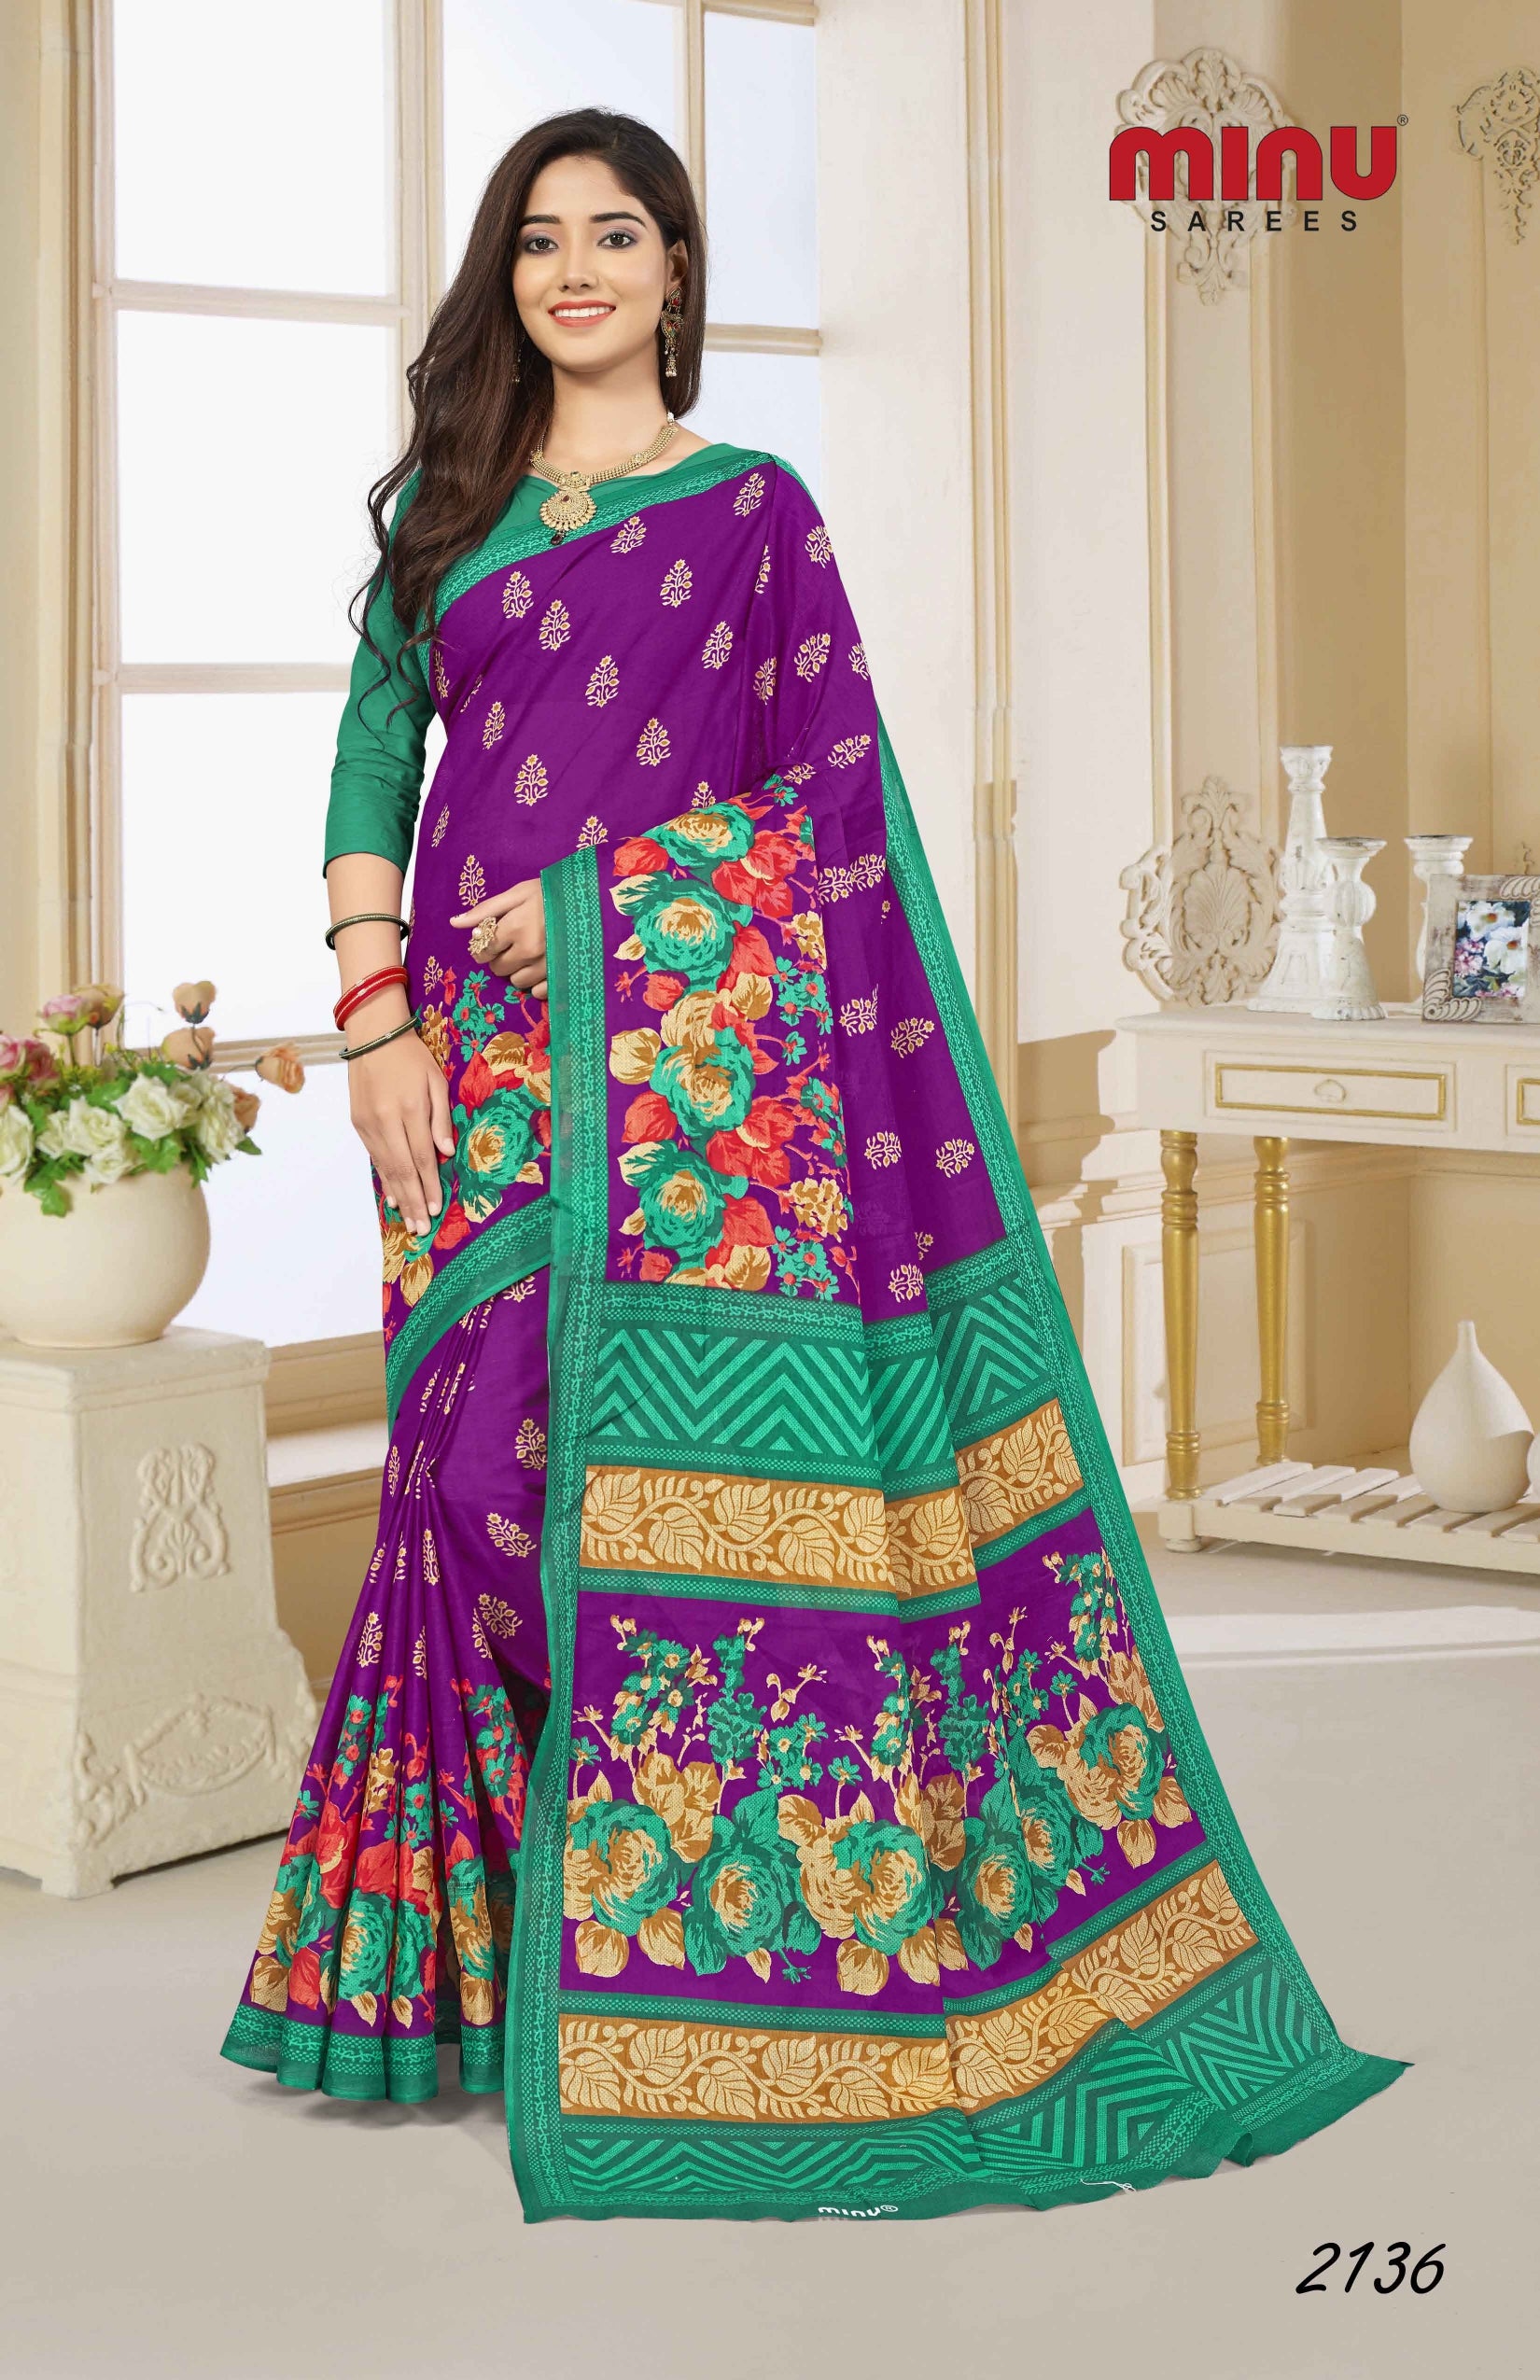 Printed saree for wholesale wearing woman